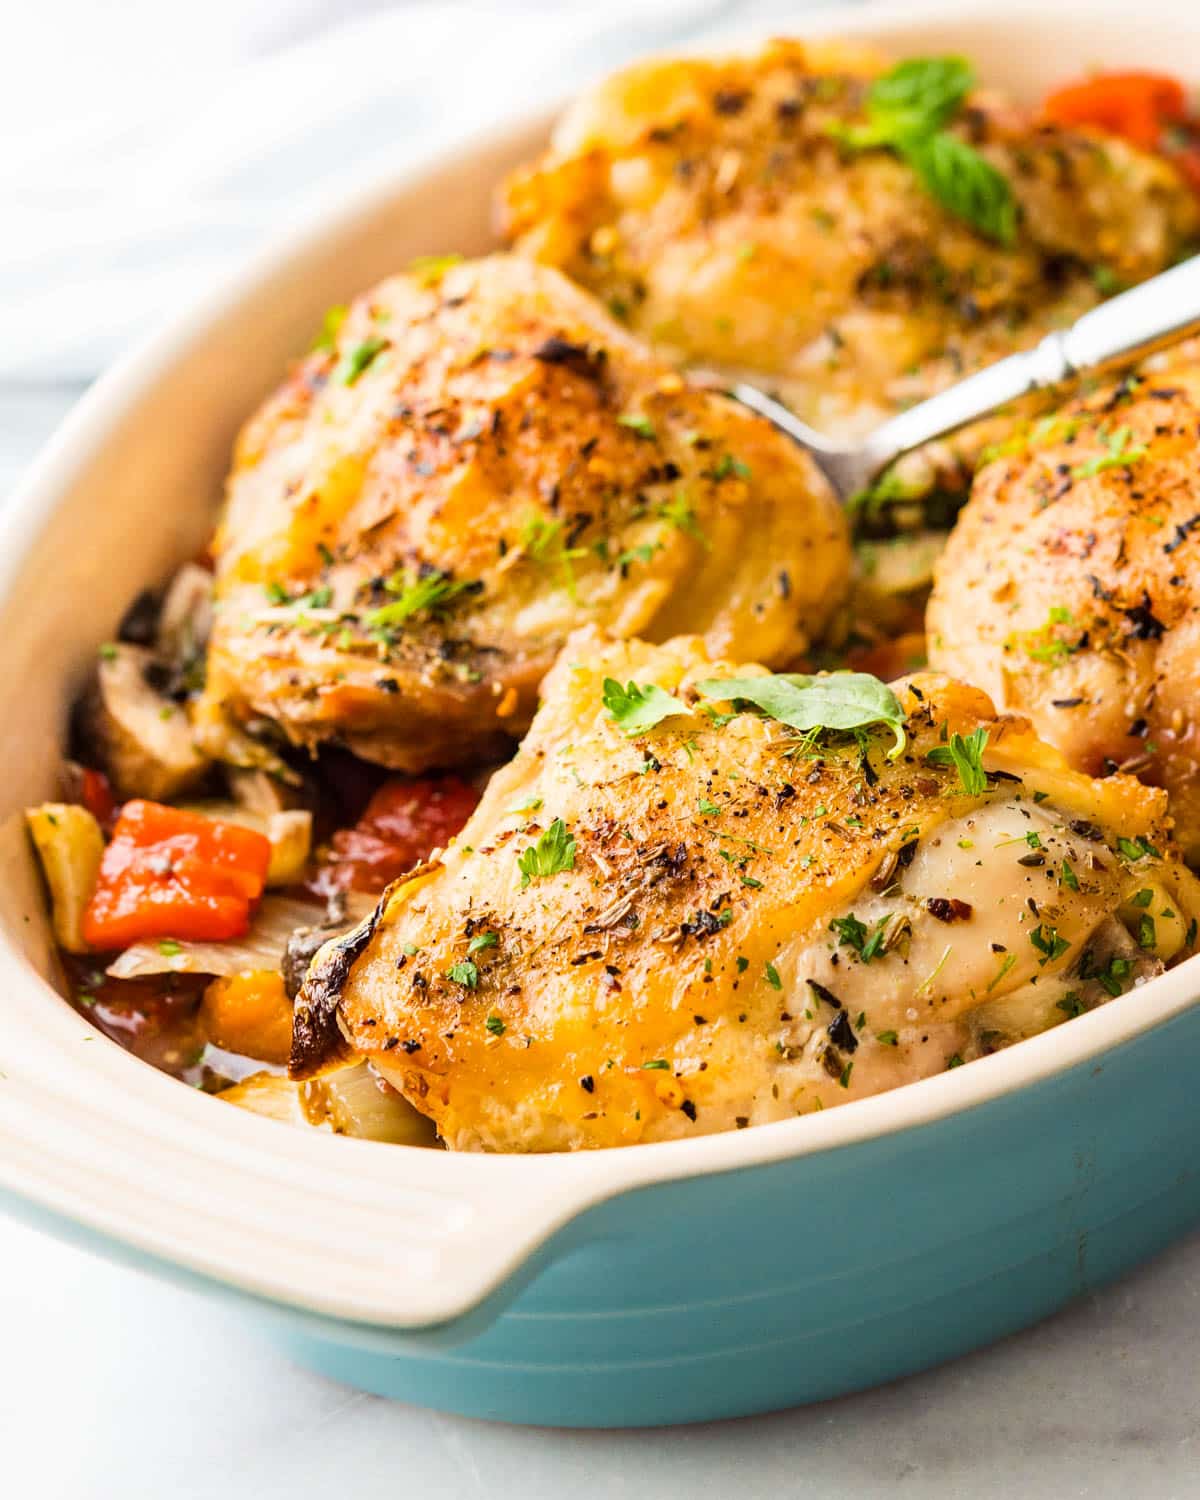 Serving baked chicken cacciatore in a baking dish.